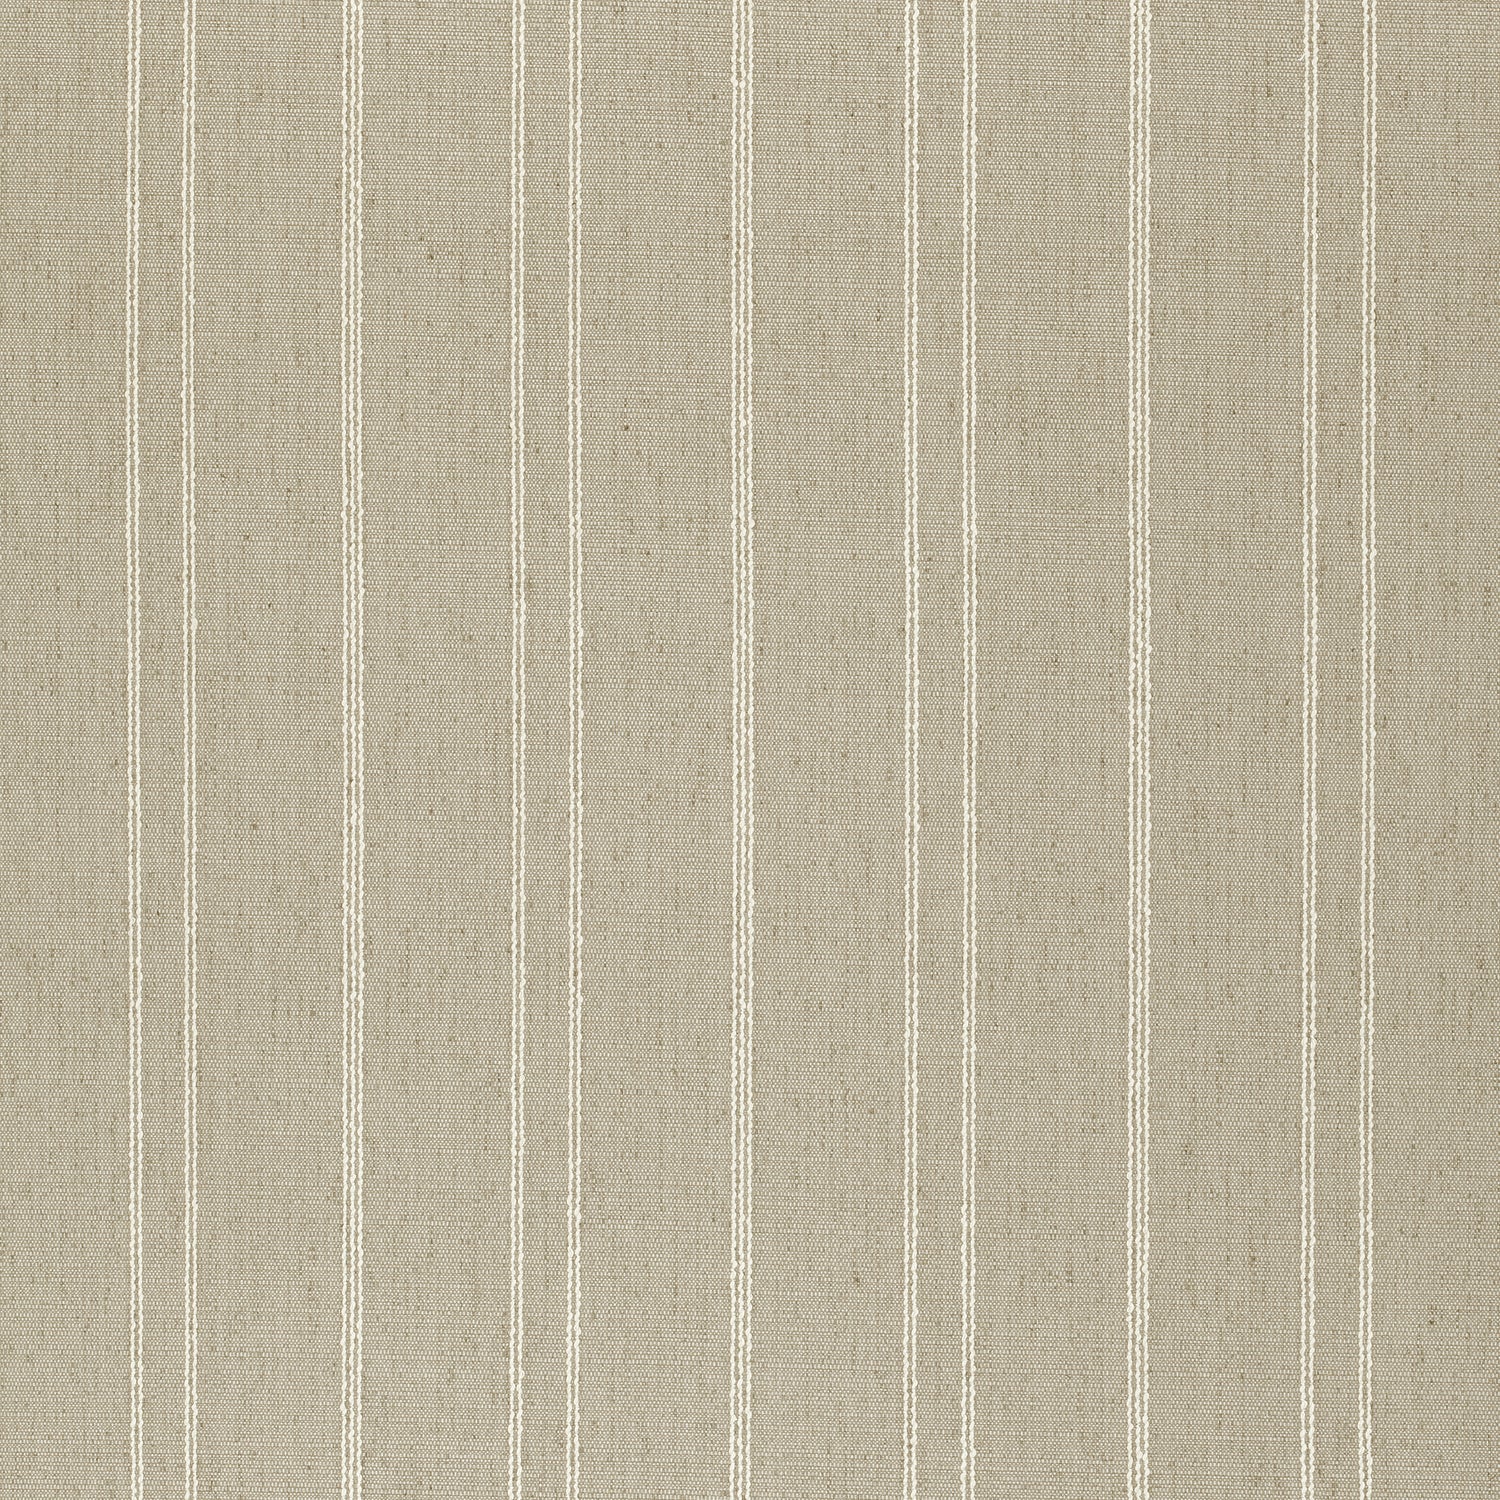 Nolan Stripe fabric in linen color - pattern number W73312 - by Thibaut in the Nomad collection